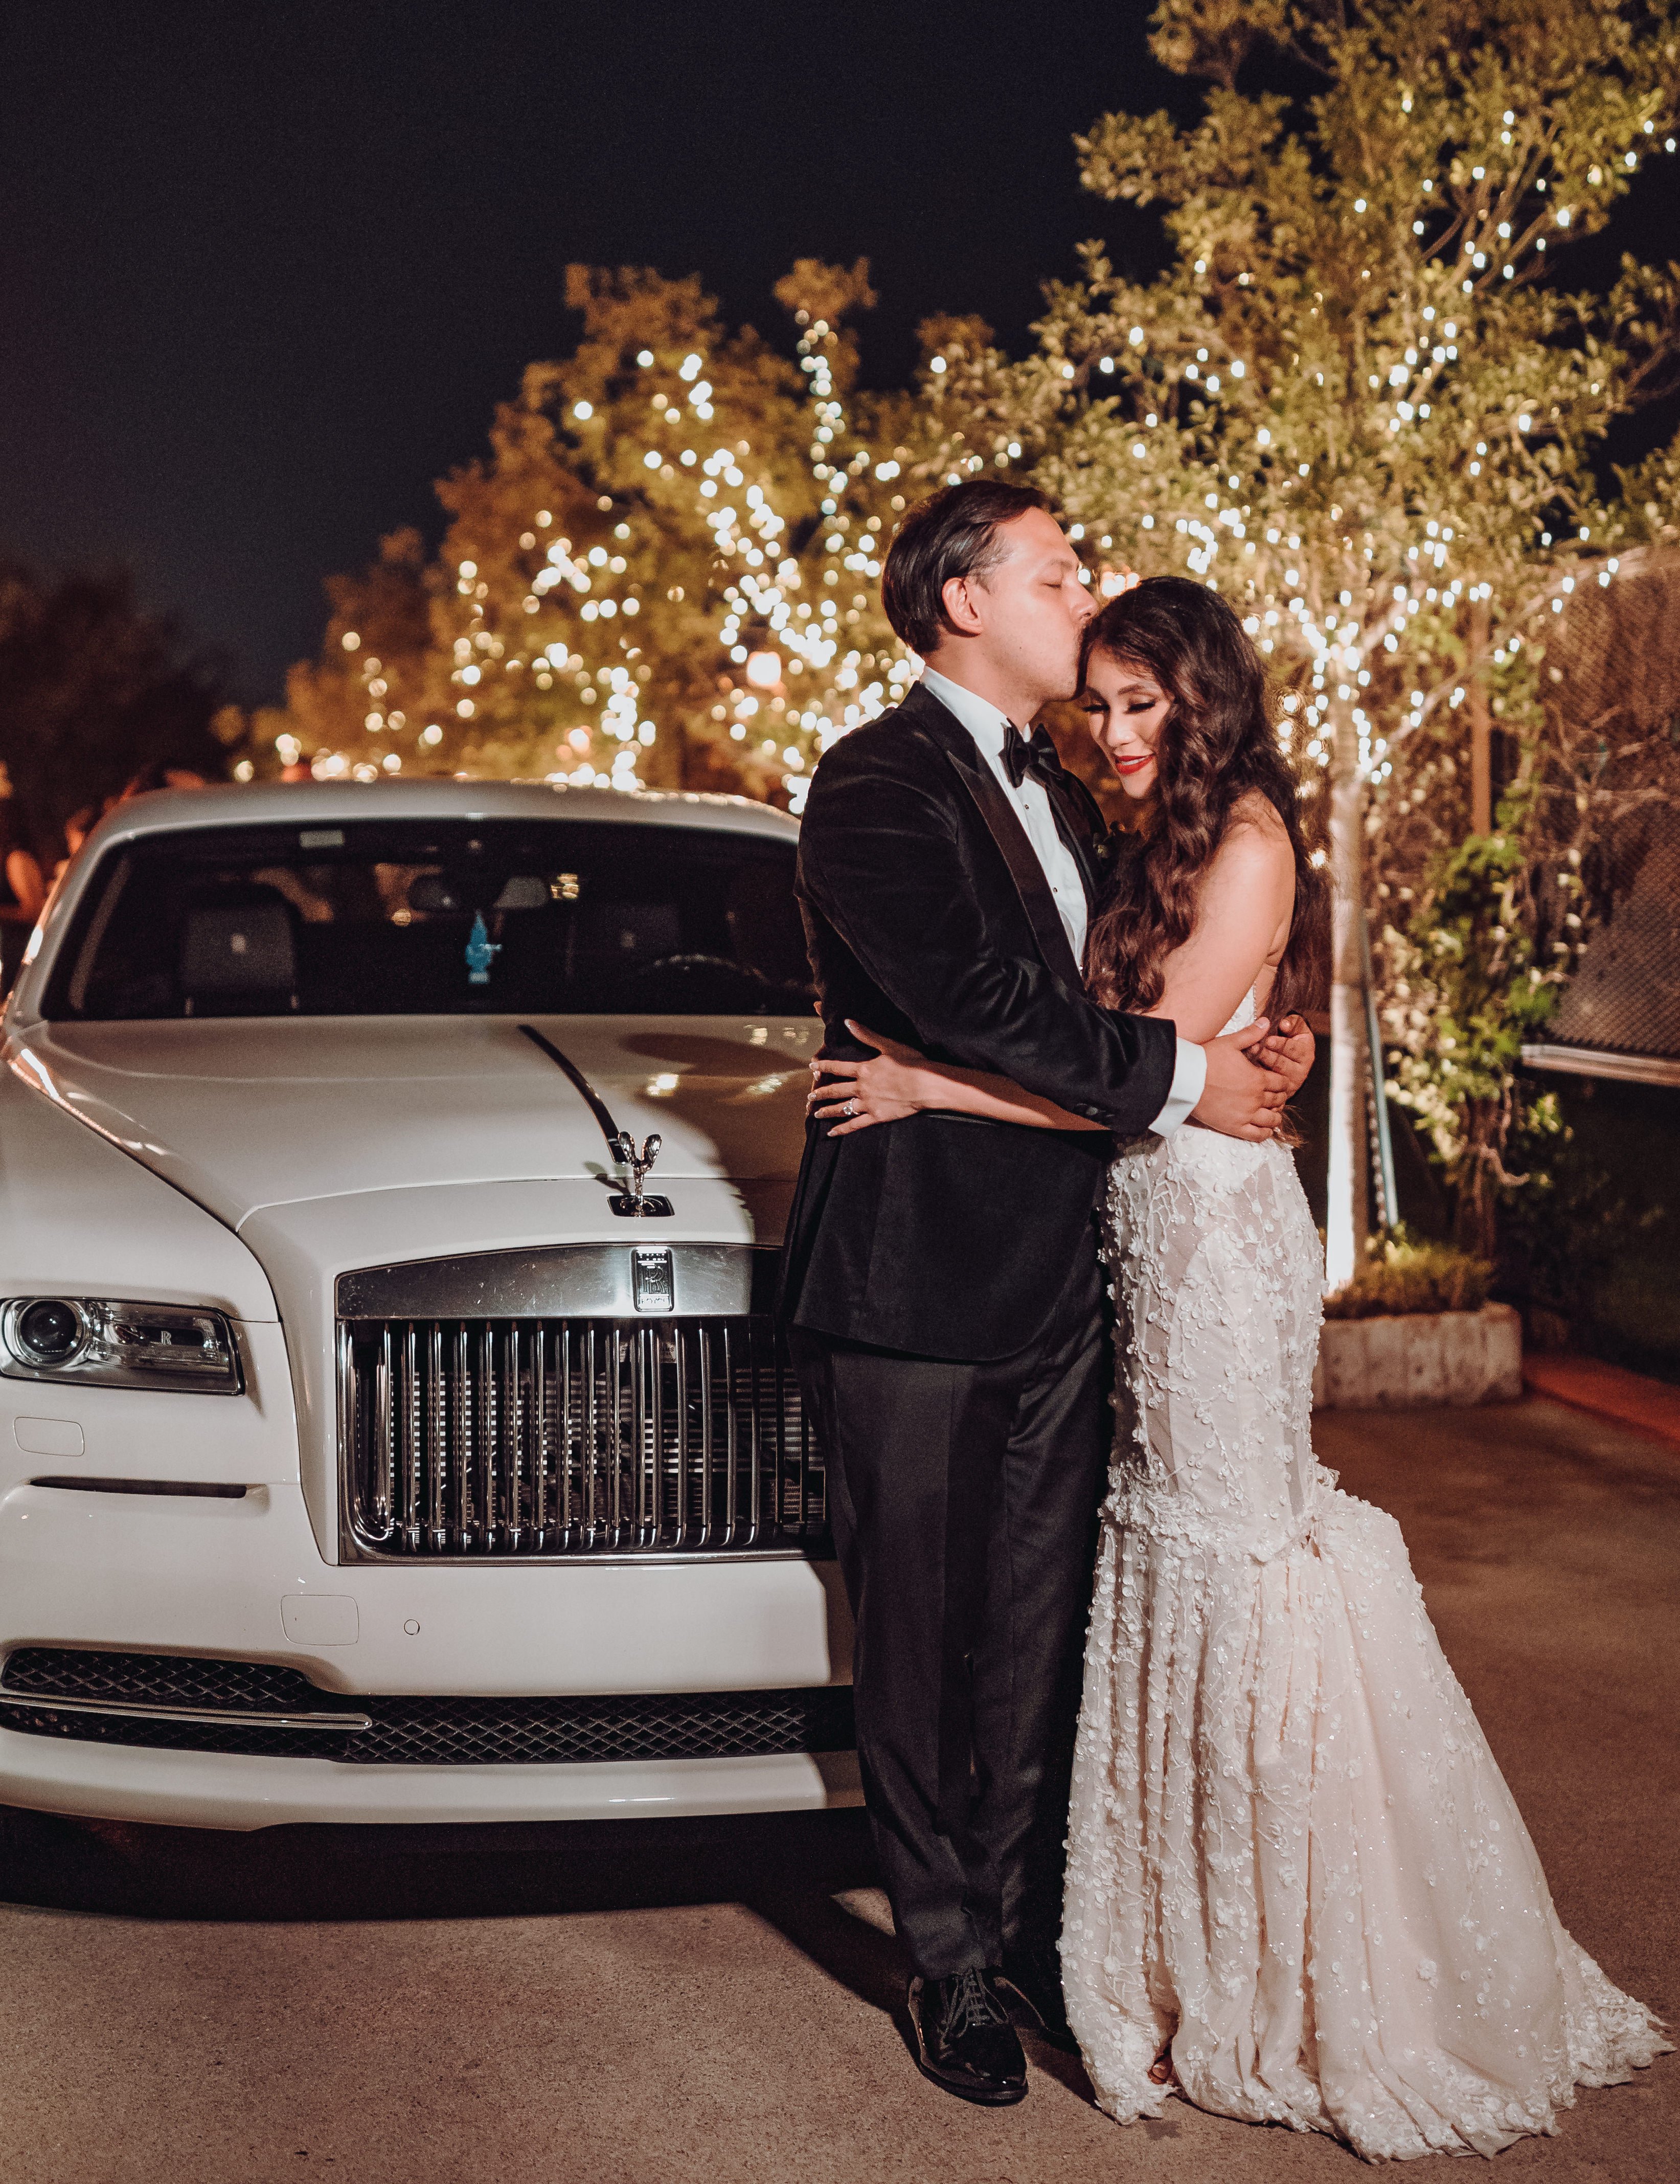 A groom kisses his bride on the cheak as they stand outside their getaway car which is a Rolls Royce.